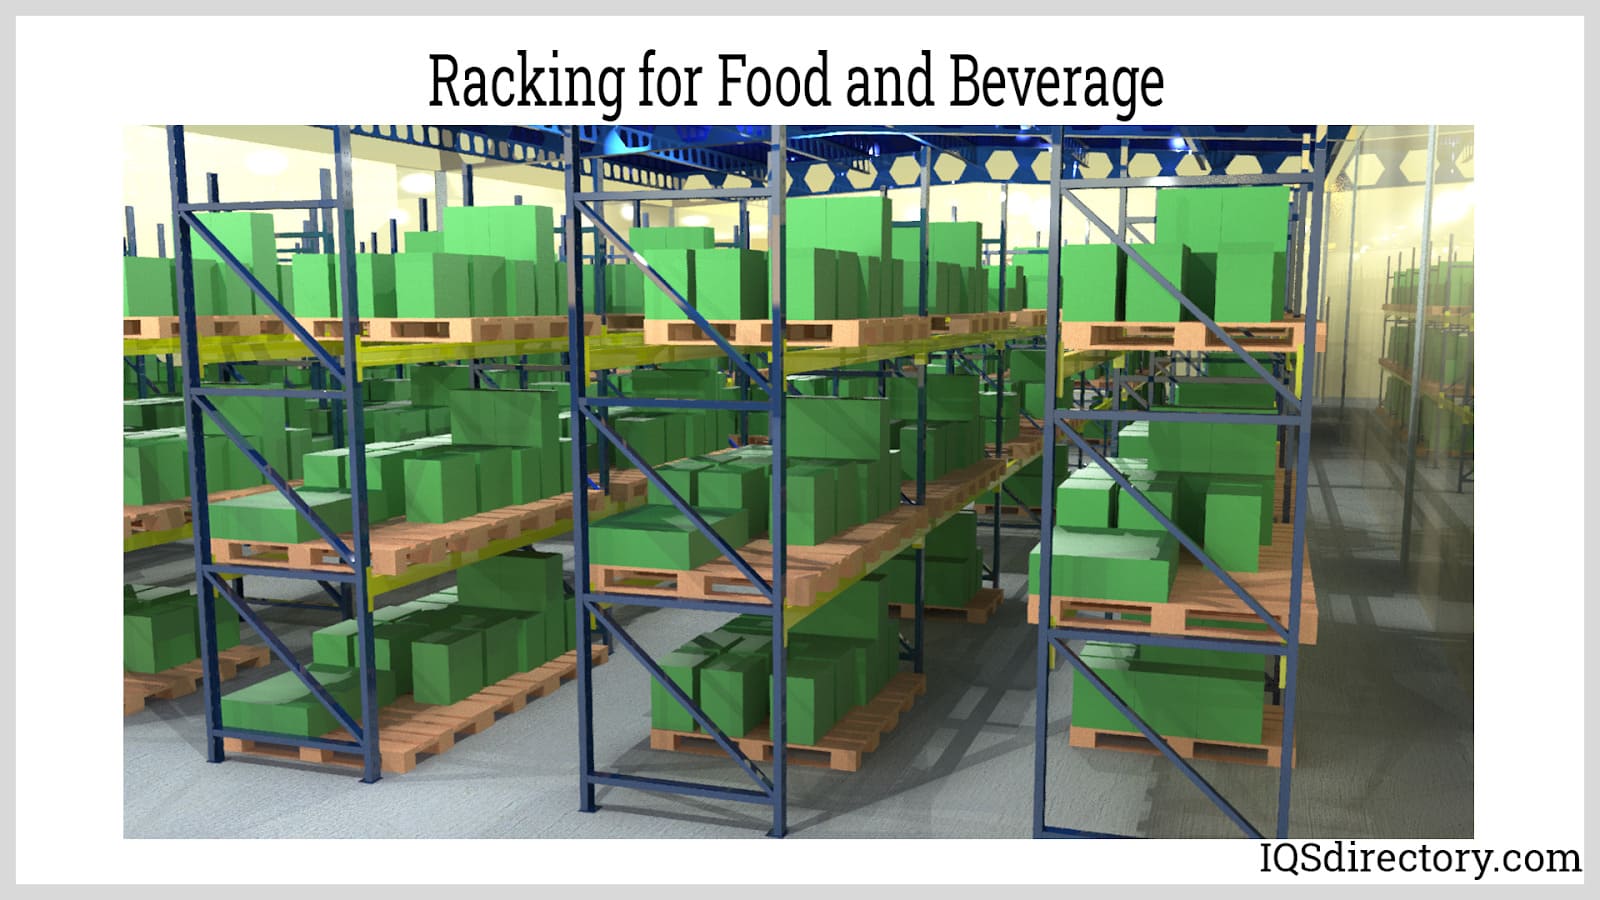 Racking for Food and Beverage